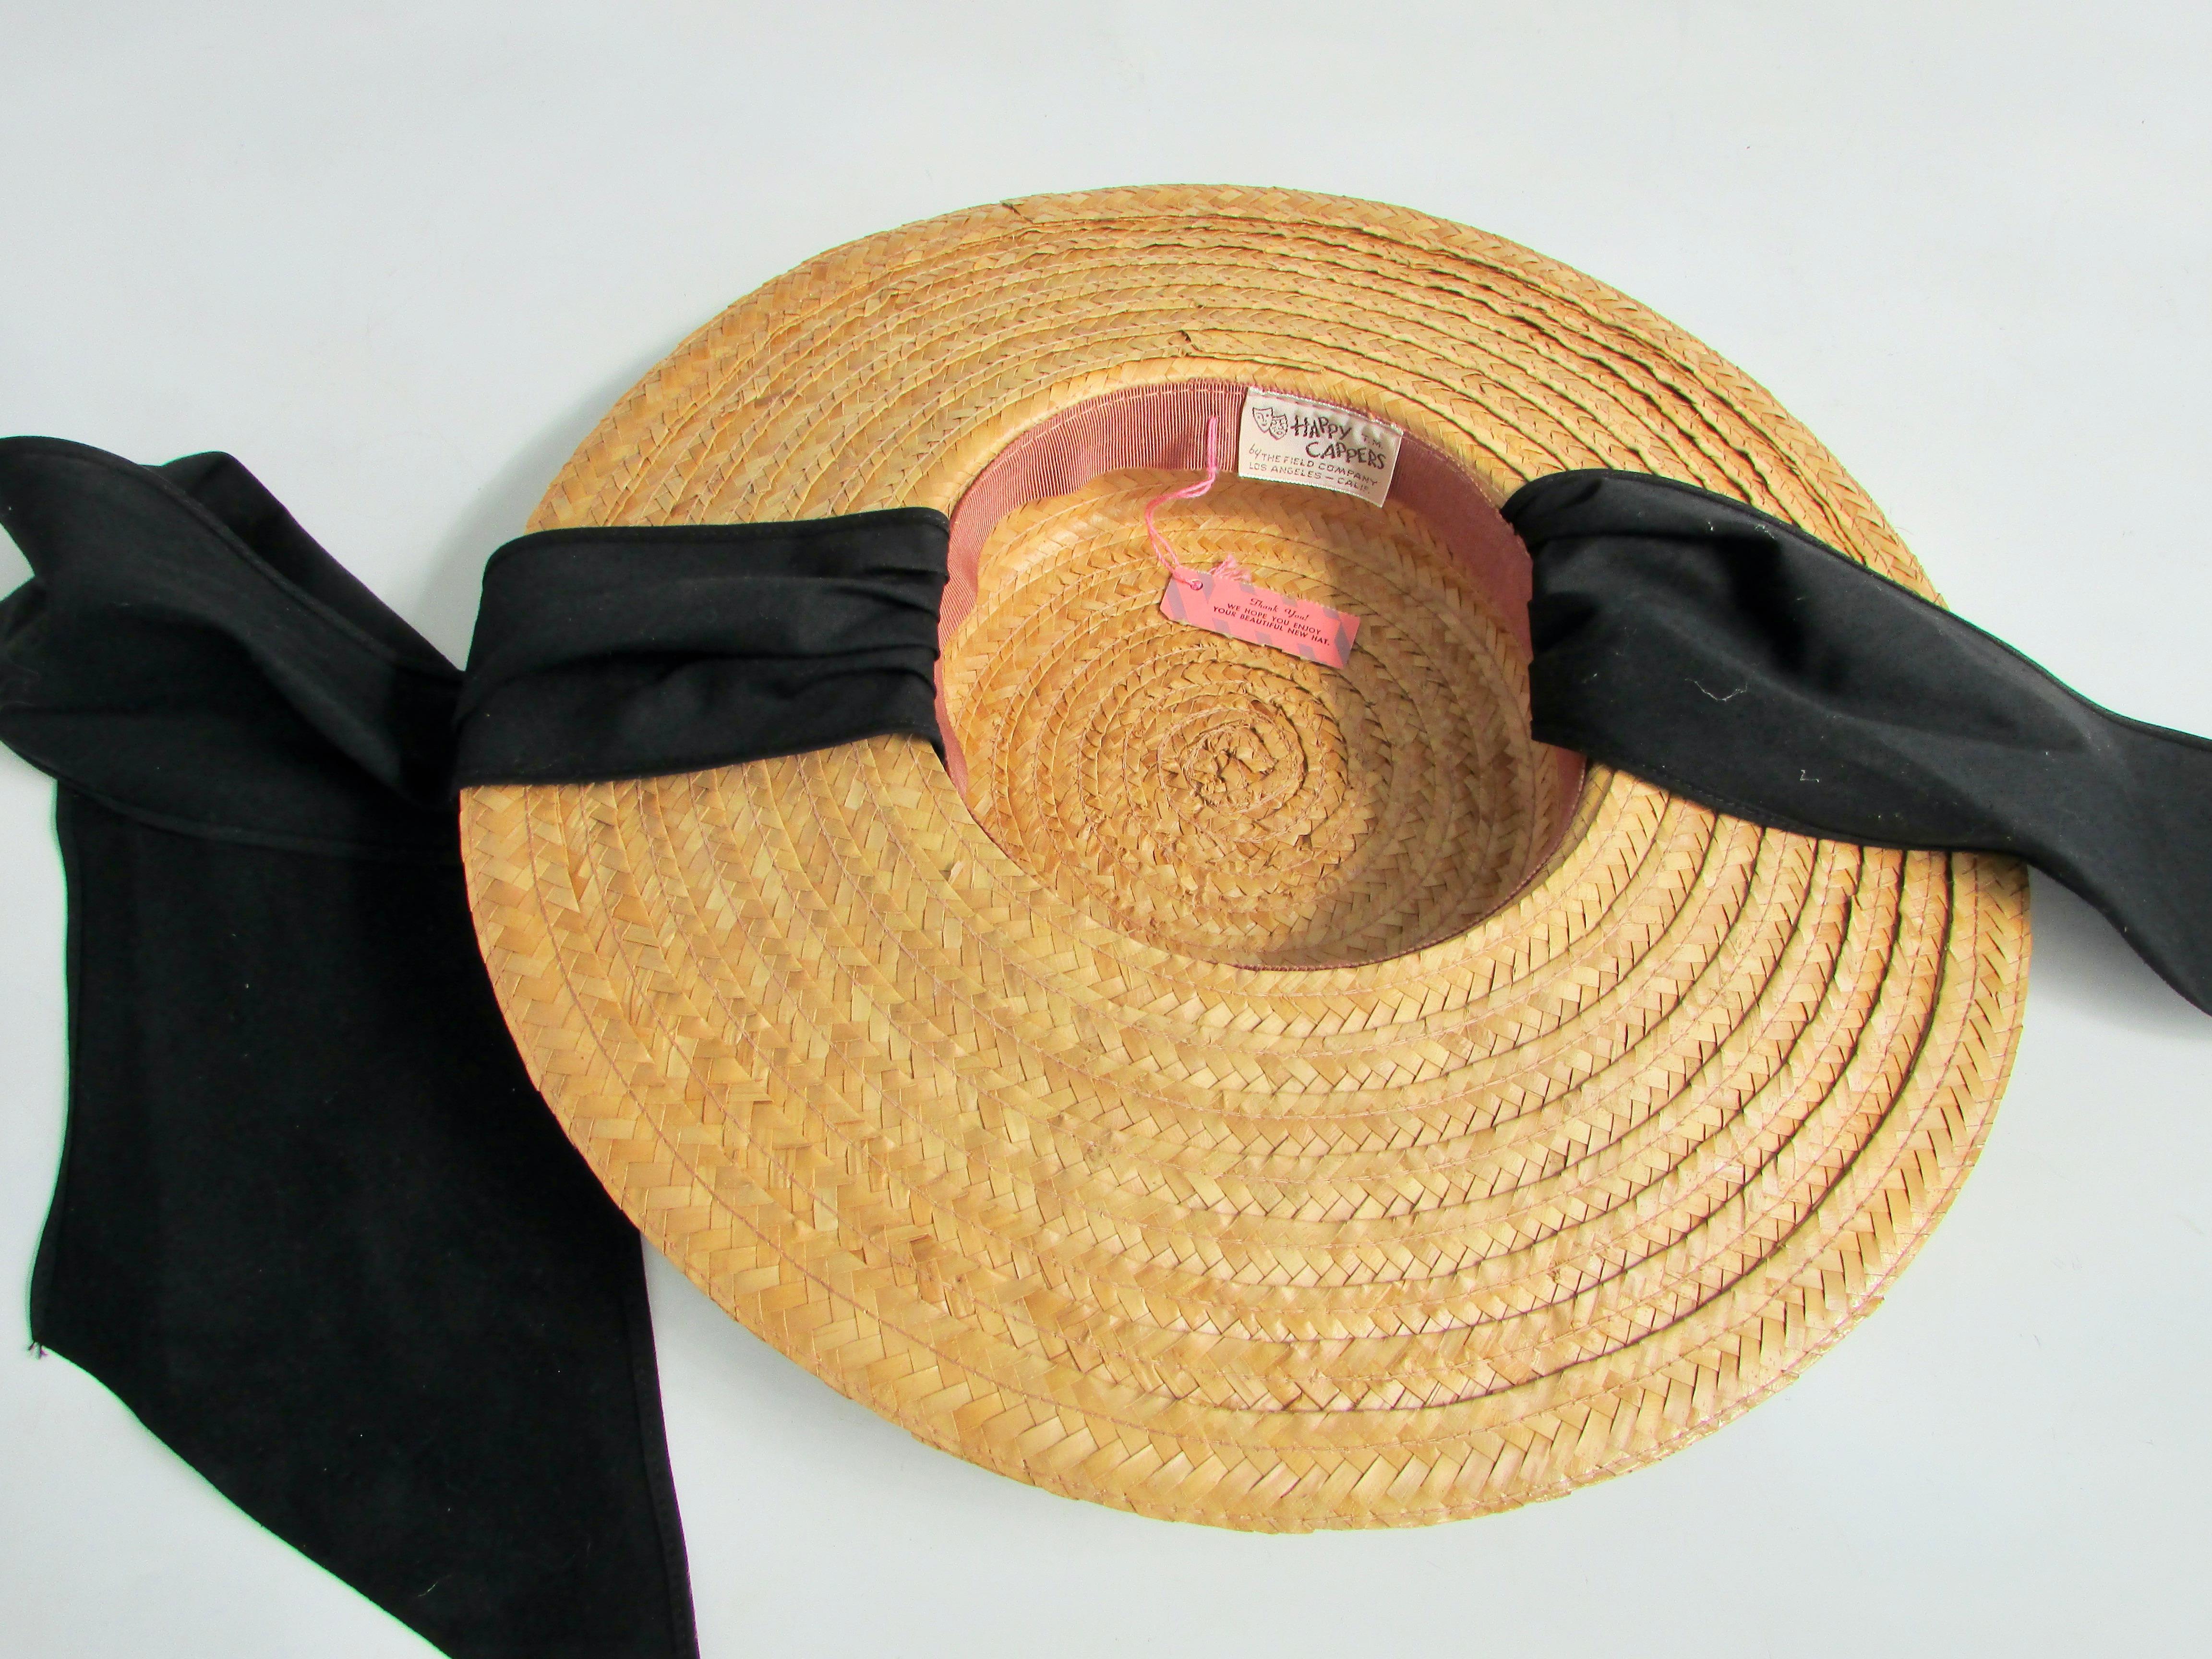 American Ladies Happy Capper Straw Hat Field Co. Los Angeles Never Worn with String Tag For Sale